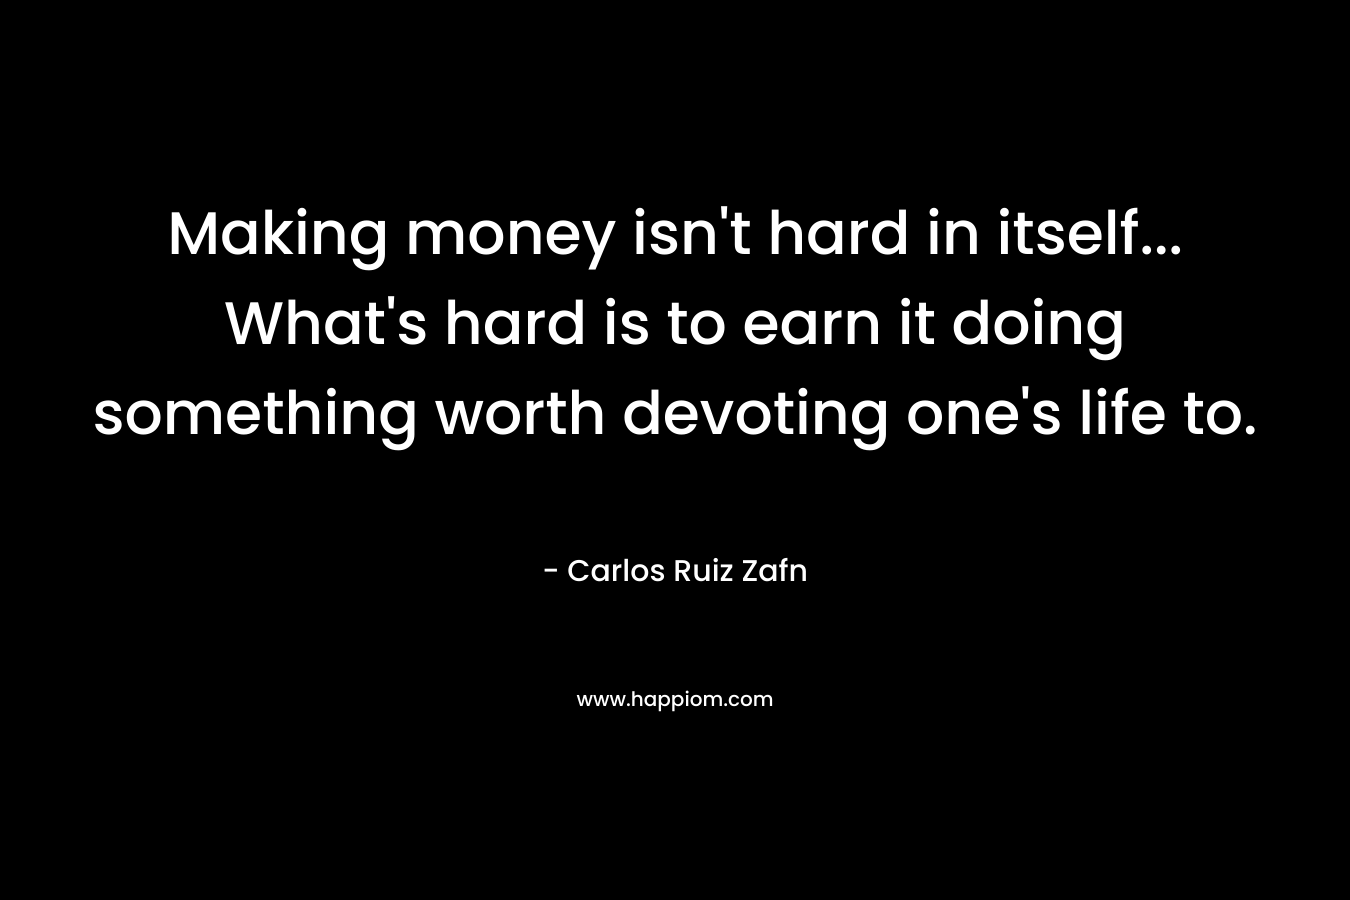 Making money isn't hard in itself... What's hard is to earn it doing something worth devoting one's life to.